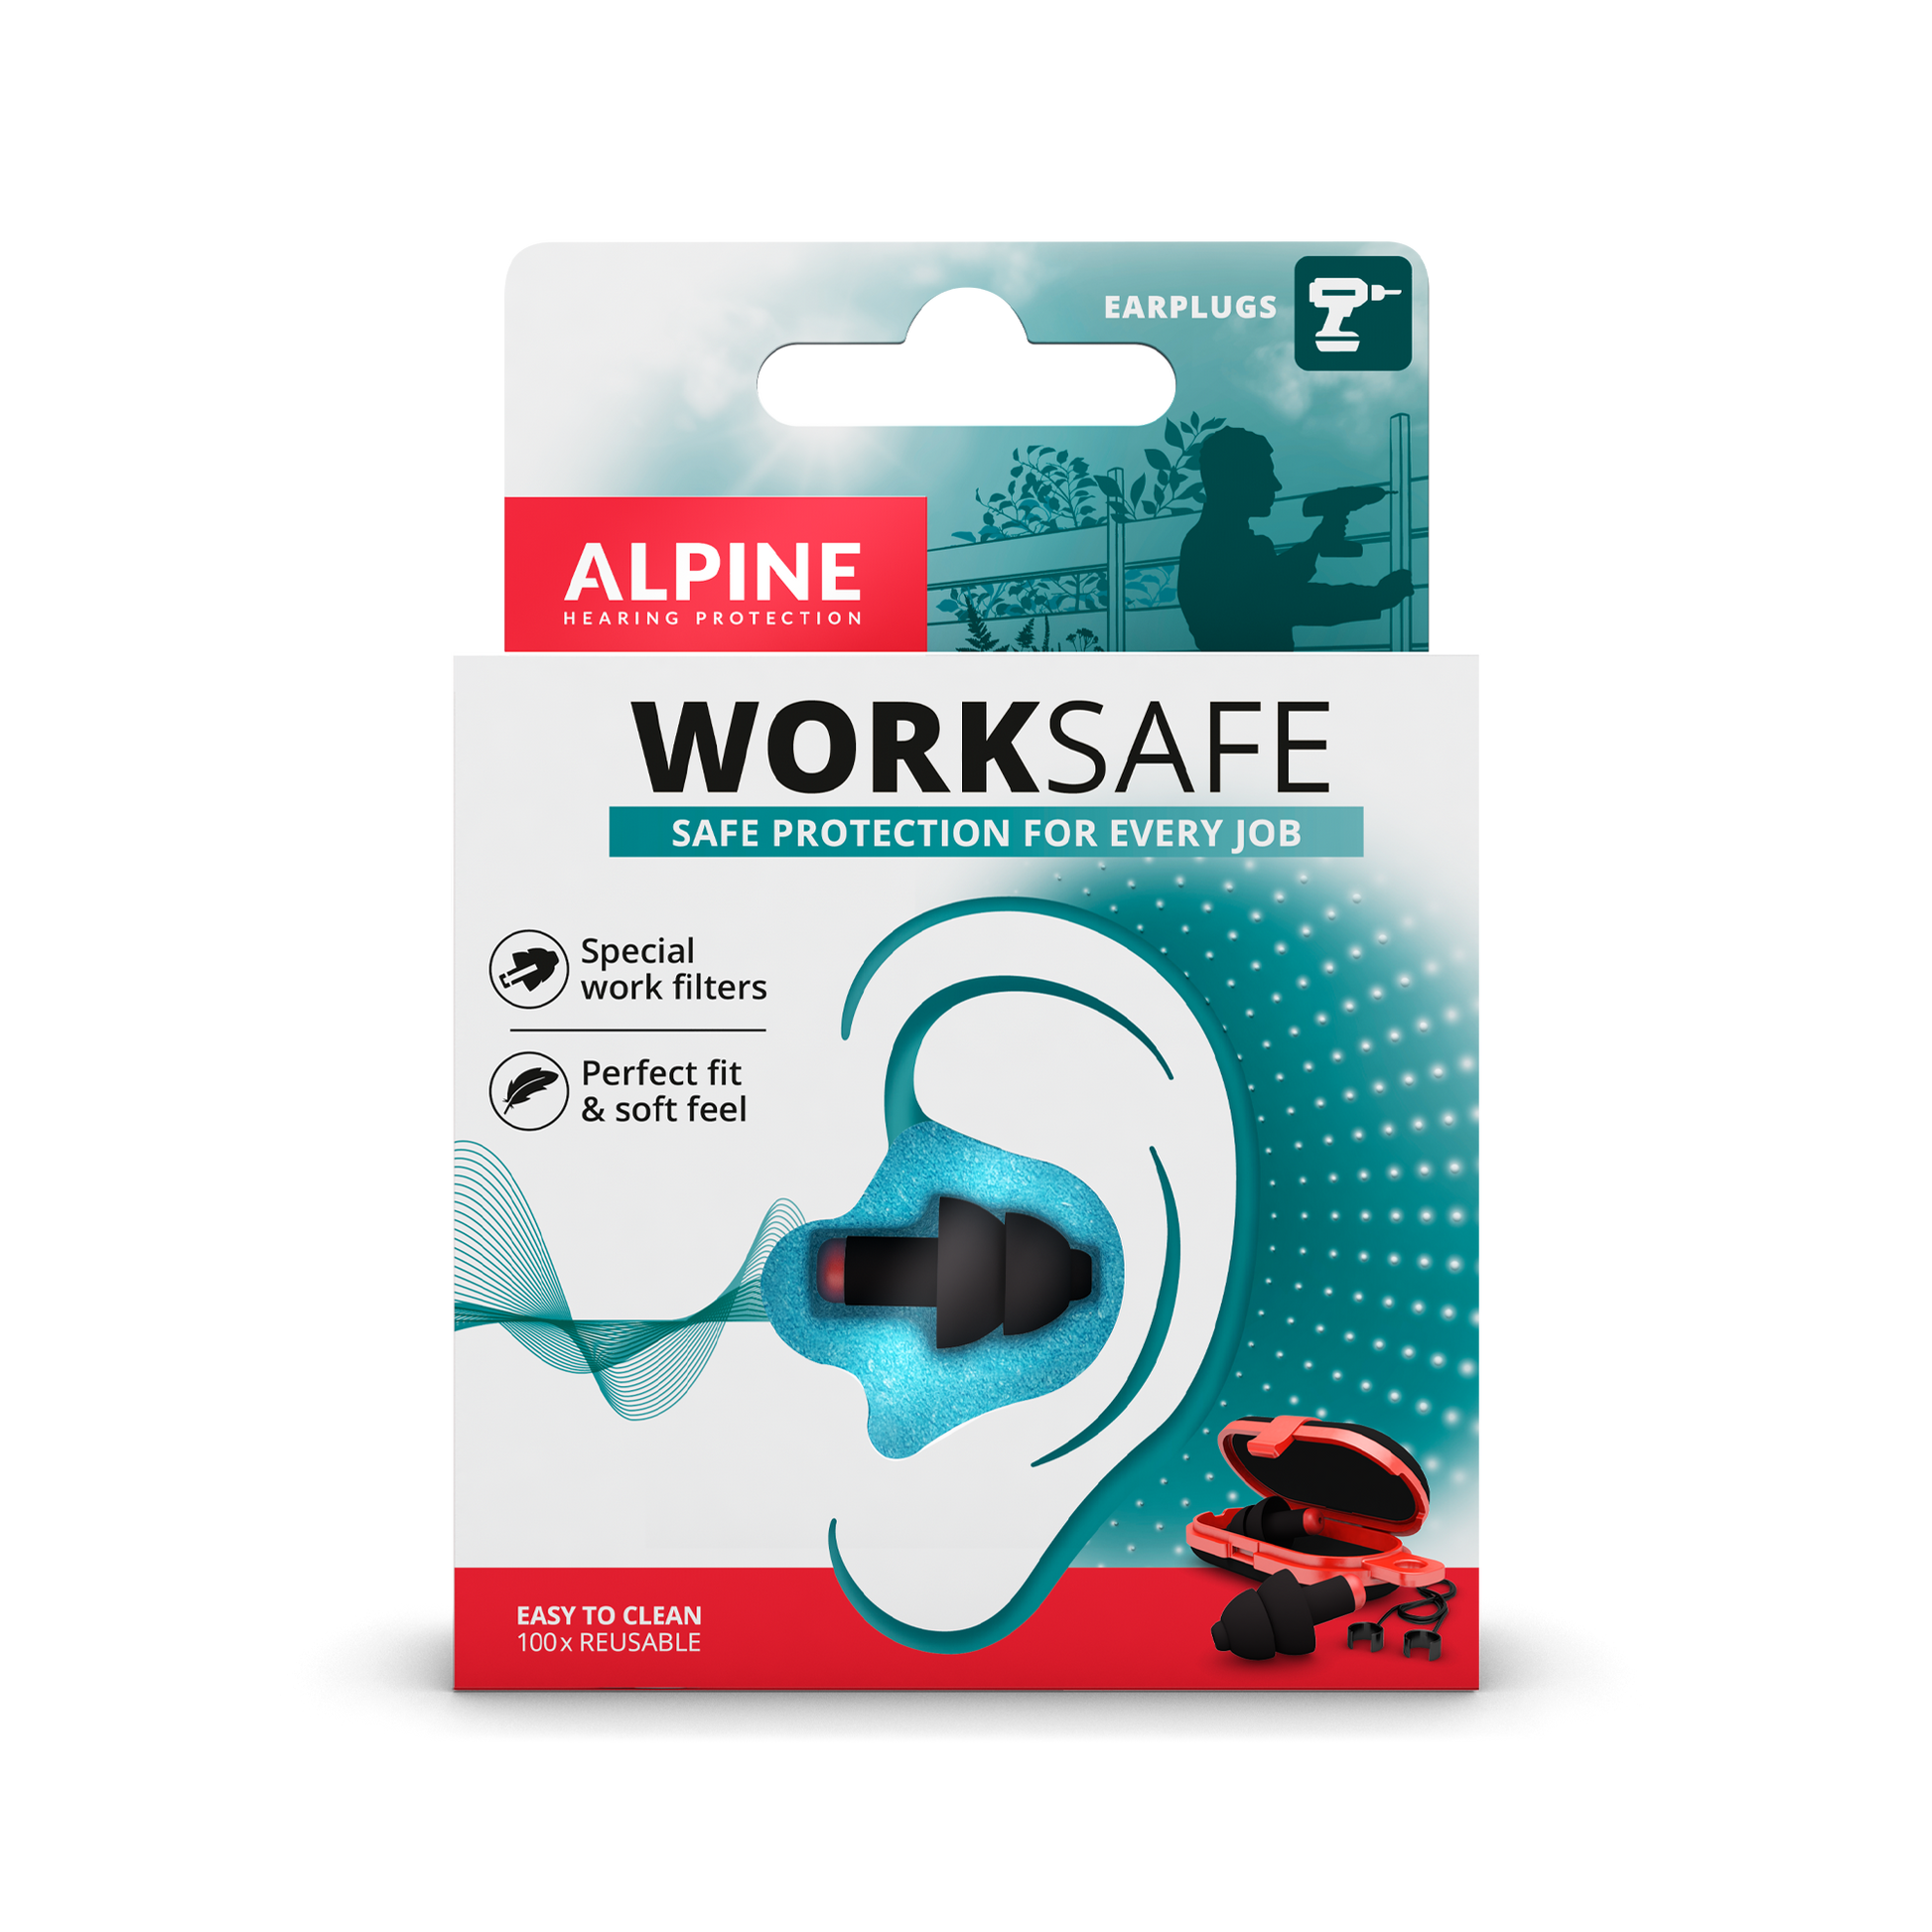 Alpine WorkSafe earplugs protect the ears during work Alpine hearing protection Earplugs earmuffs protect your ear red dot award working projects hobby professional Work safe Muffy Baby Muffy Kids Plug&Go packaging black 